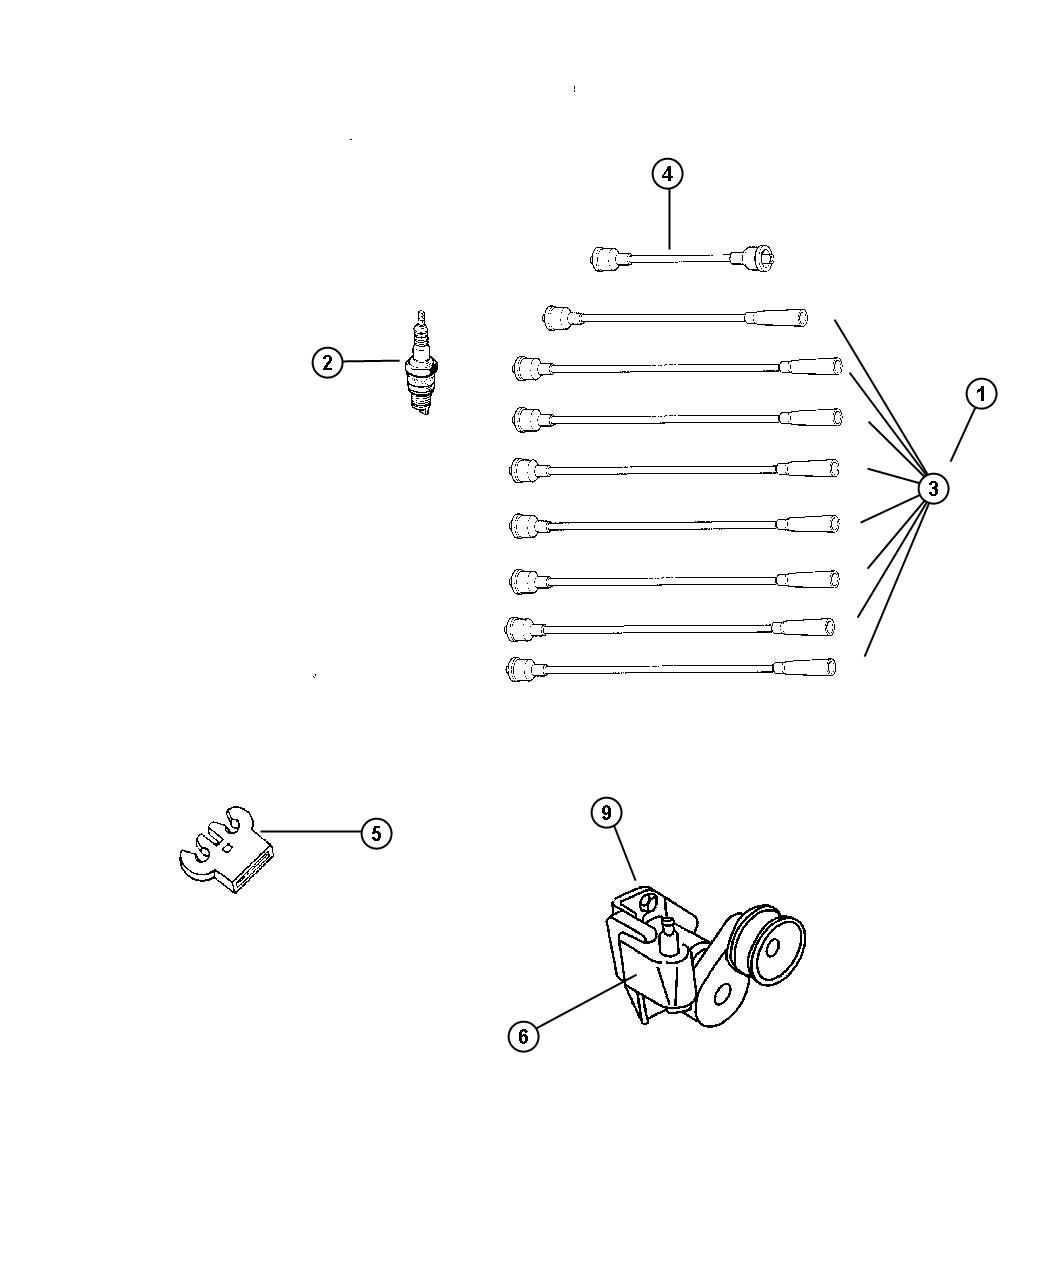 Spark Plugs, Cables, and Coil. Diagram